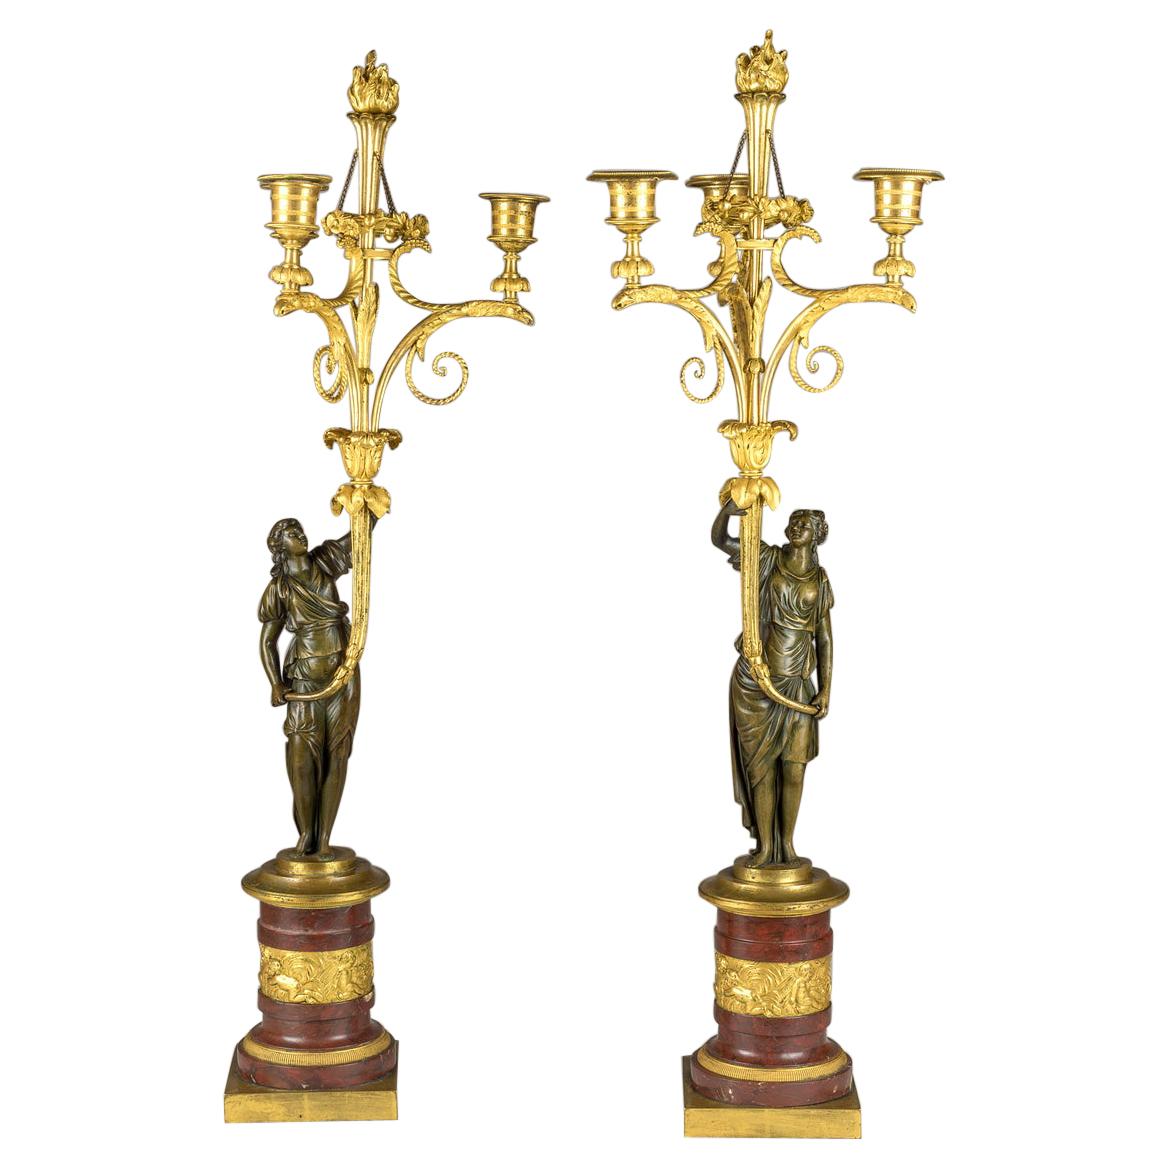 Exceptional Pair of Directoire Ormolu and Marble Three-Light Figural Candelabra For Sale